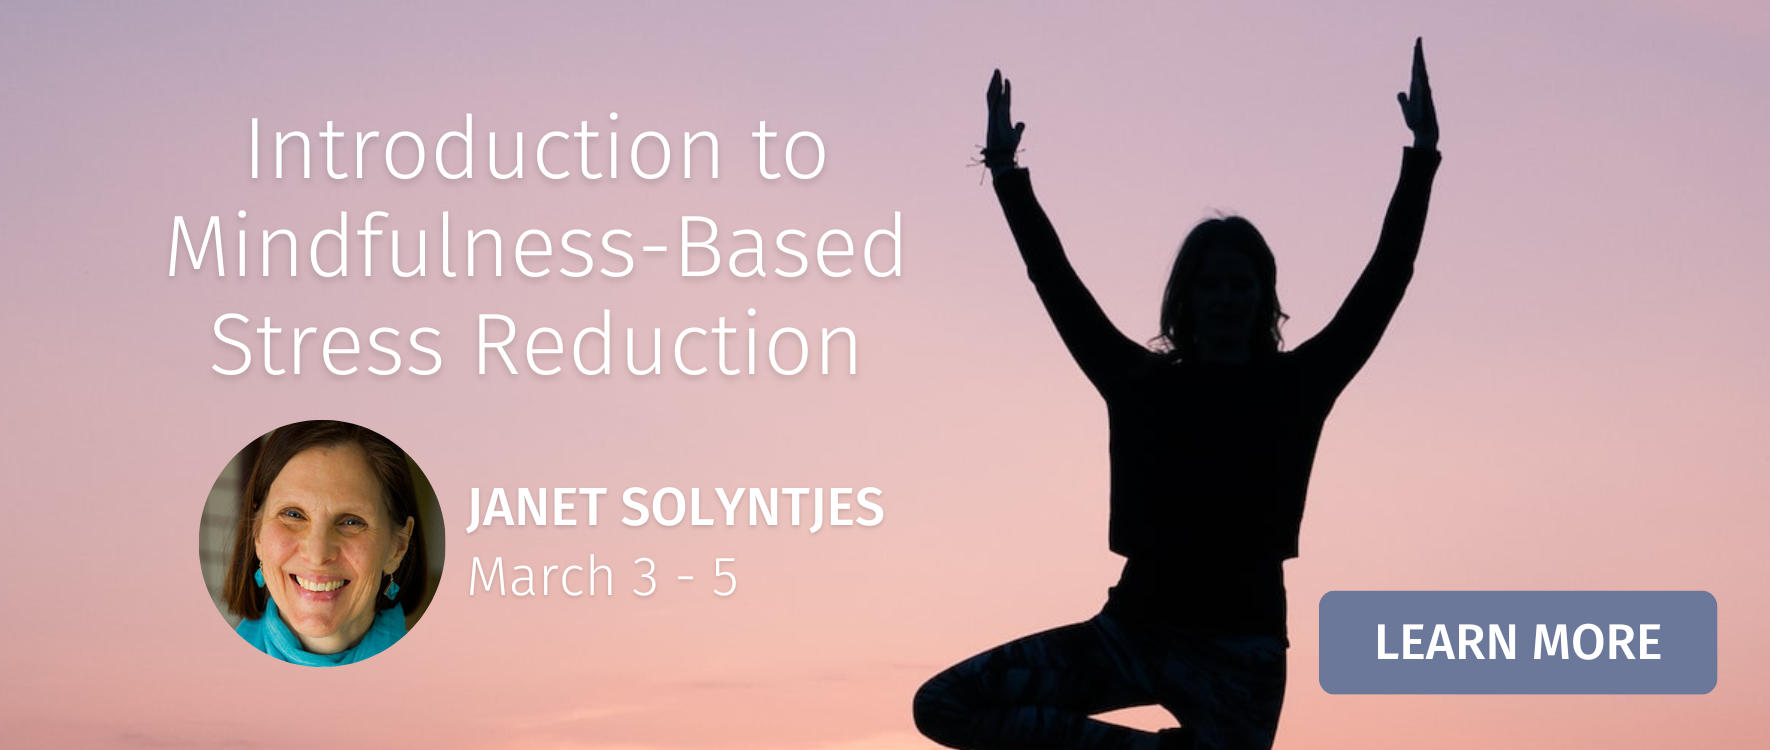 Introduction to Mindfulness-Based Stress Reduction March 3-5, 2023